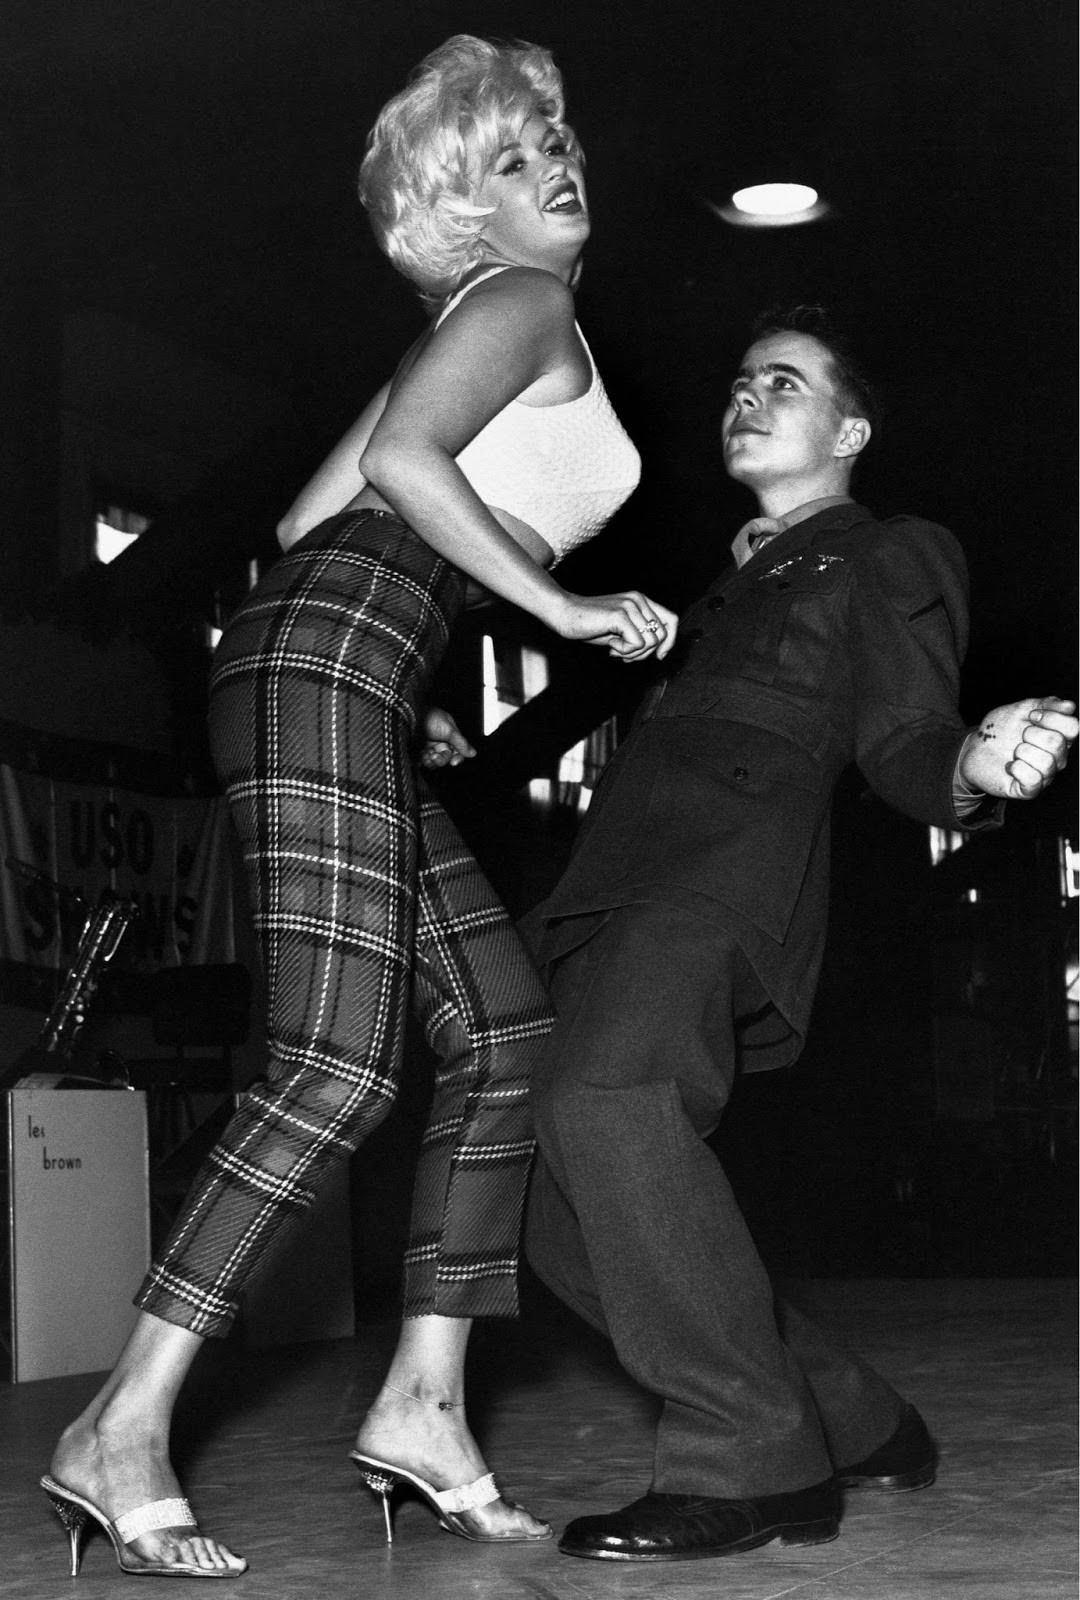 Actress Jayne Mansfield danced with U.S. soldiers stationed in Canada for a Christmas 1961 appearance.